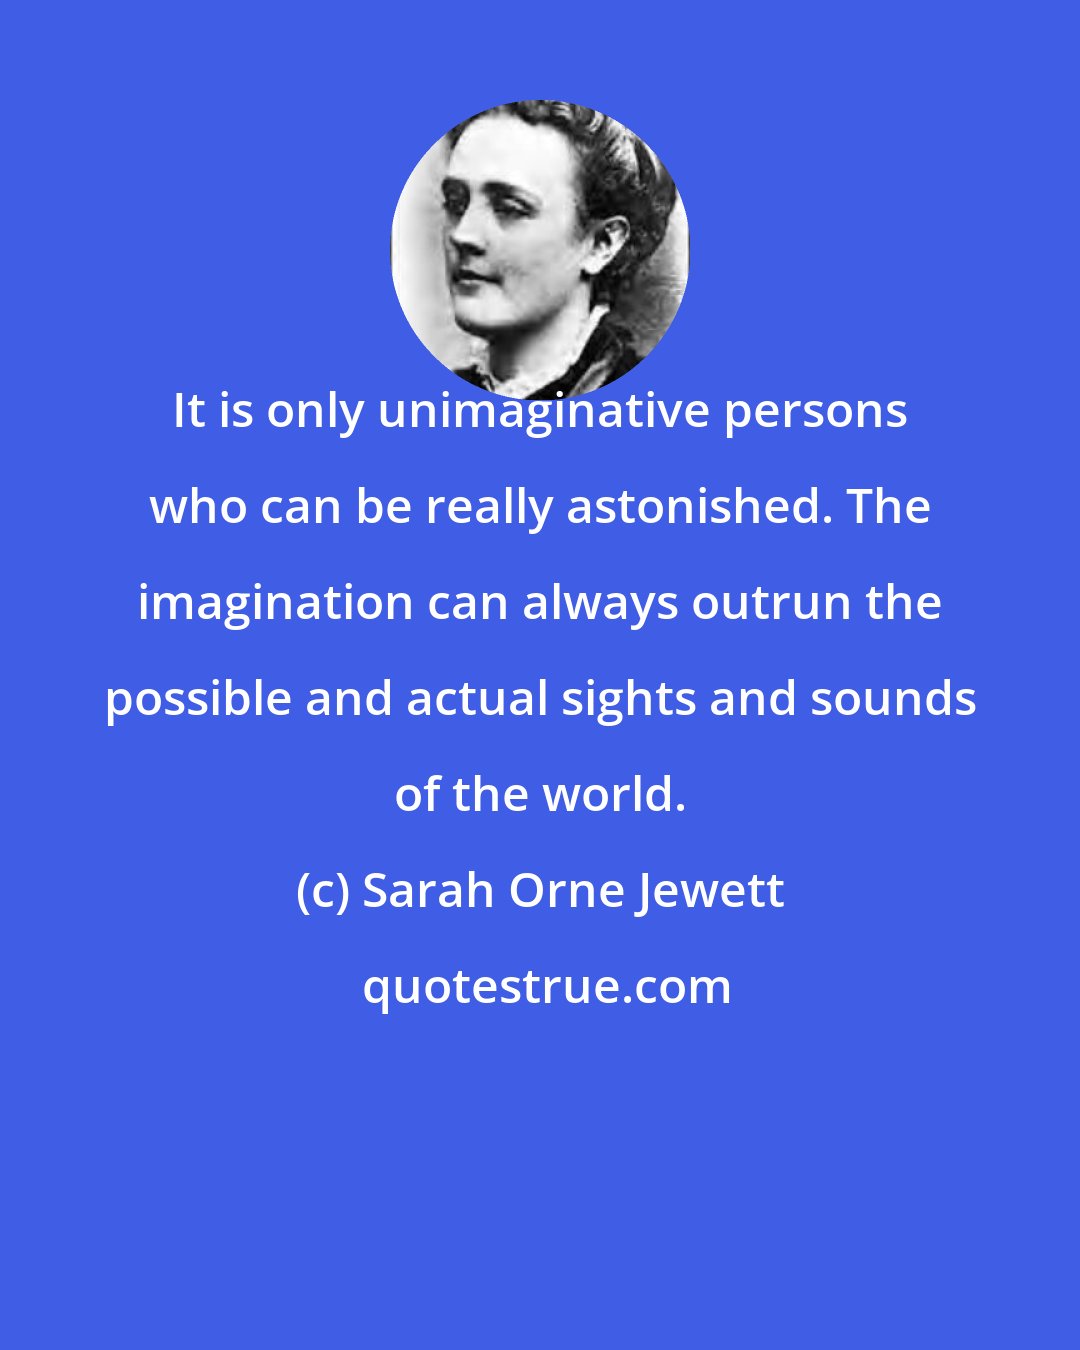 Sarah Orne Jewett: It is only unimaginative persons who can be really astonished. The imagination can always outrun the possible and actual sights and sounds of the world.